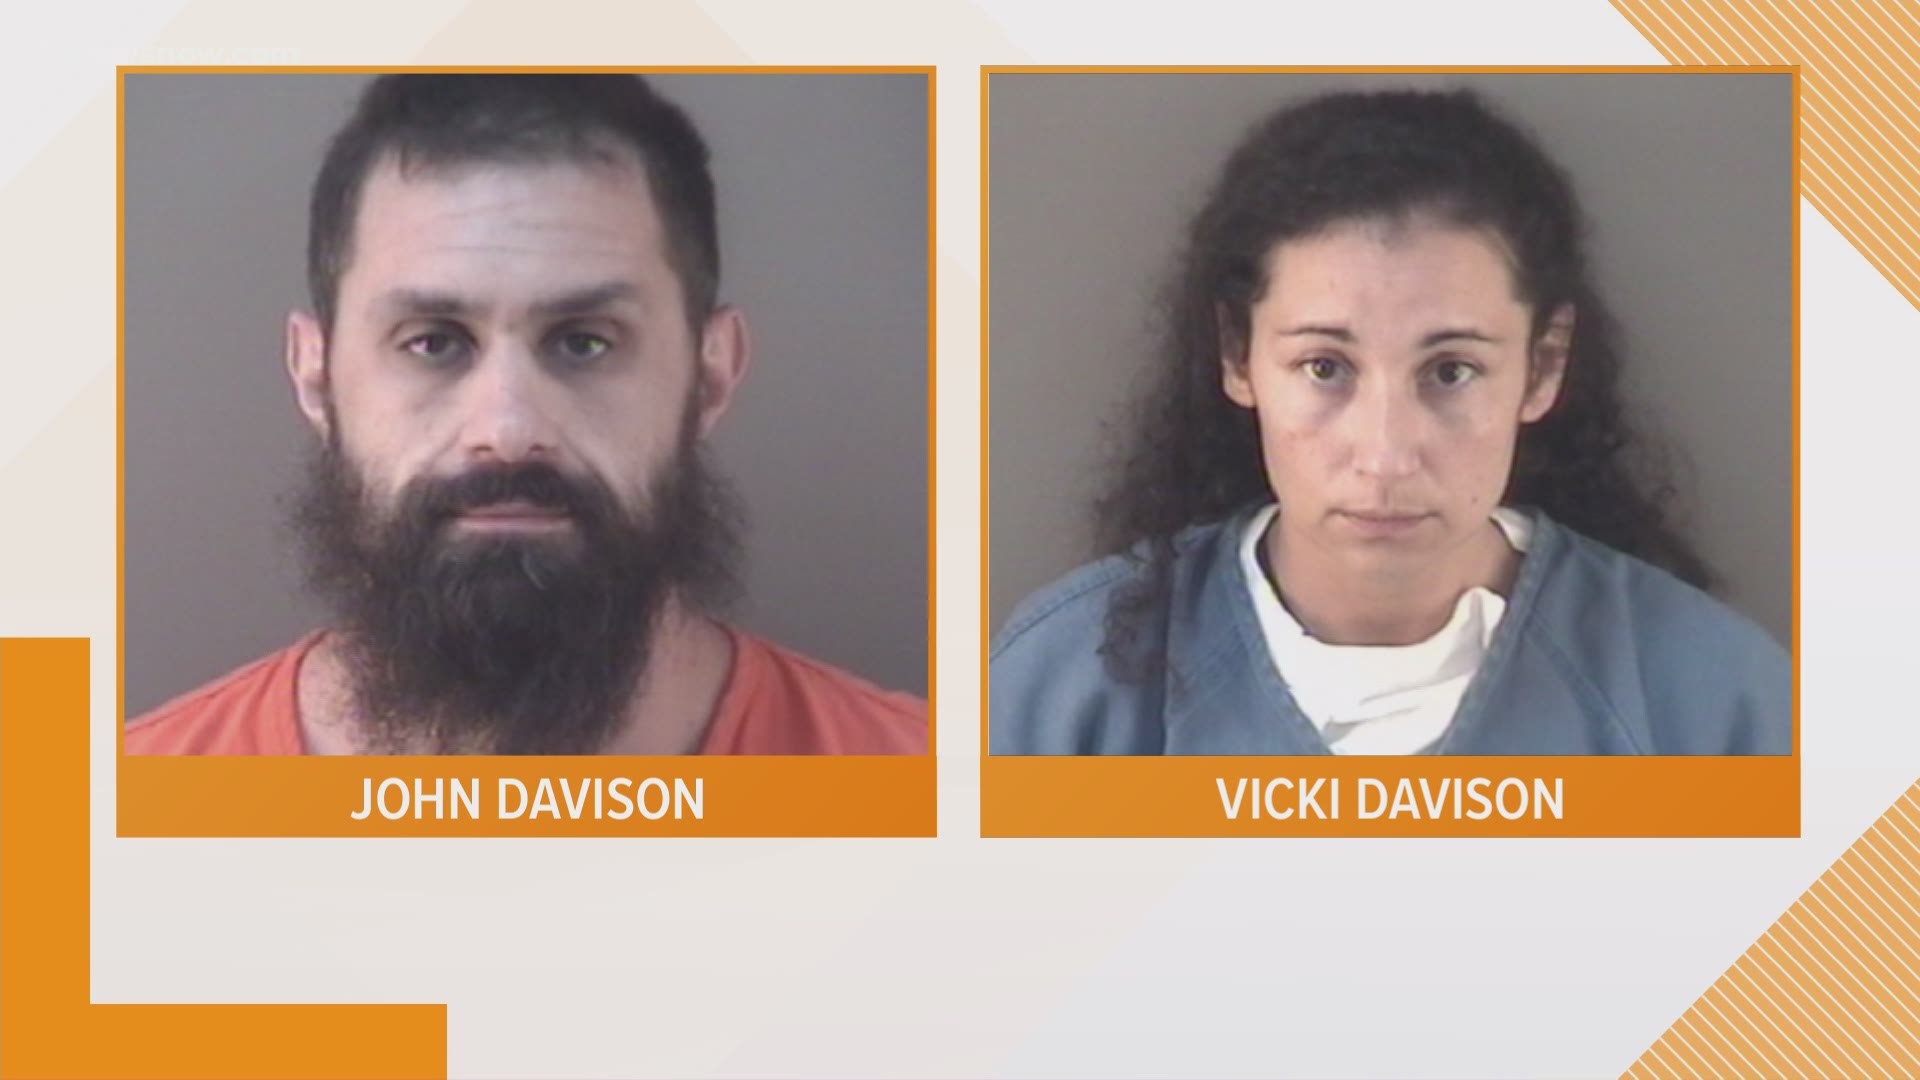 John and Vicki Davison were found walking behind the Toledo Executive Airport in Ohio with shovels, pitchforks and a backpack with a gun.